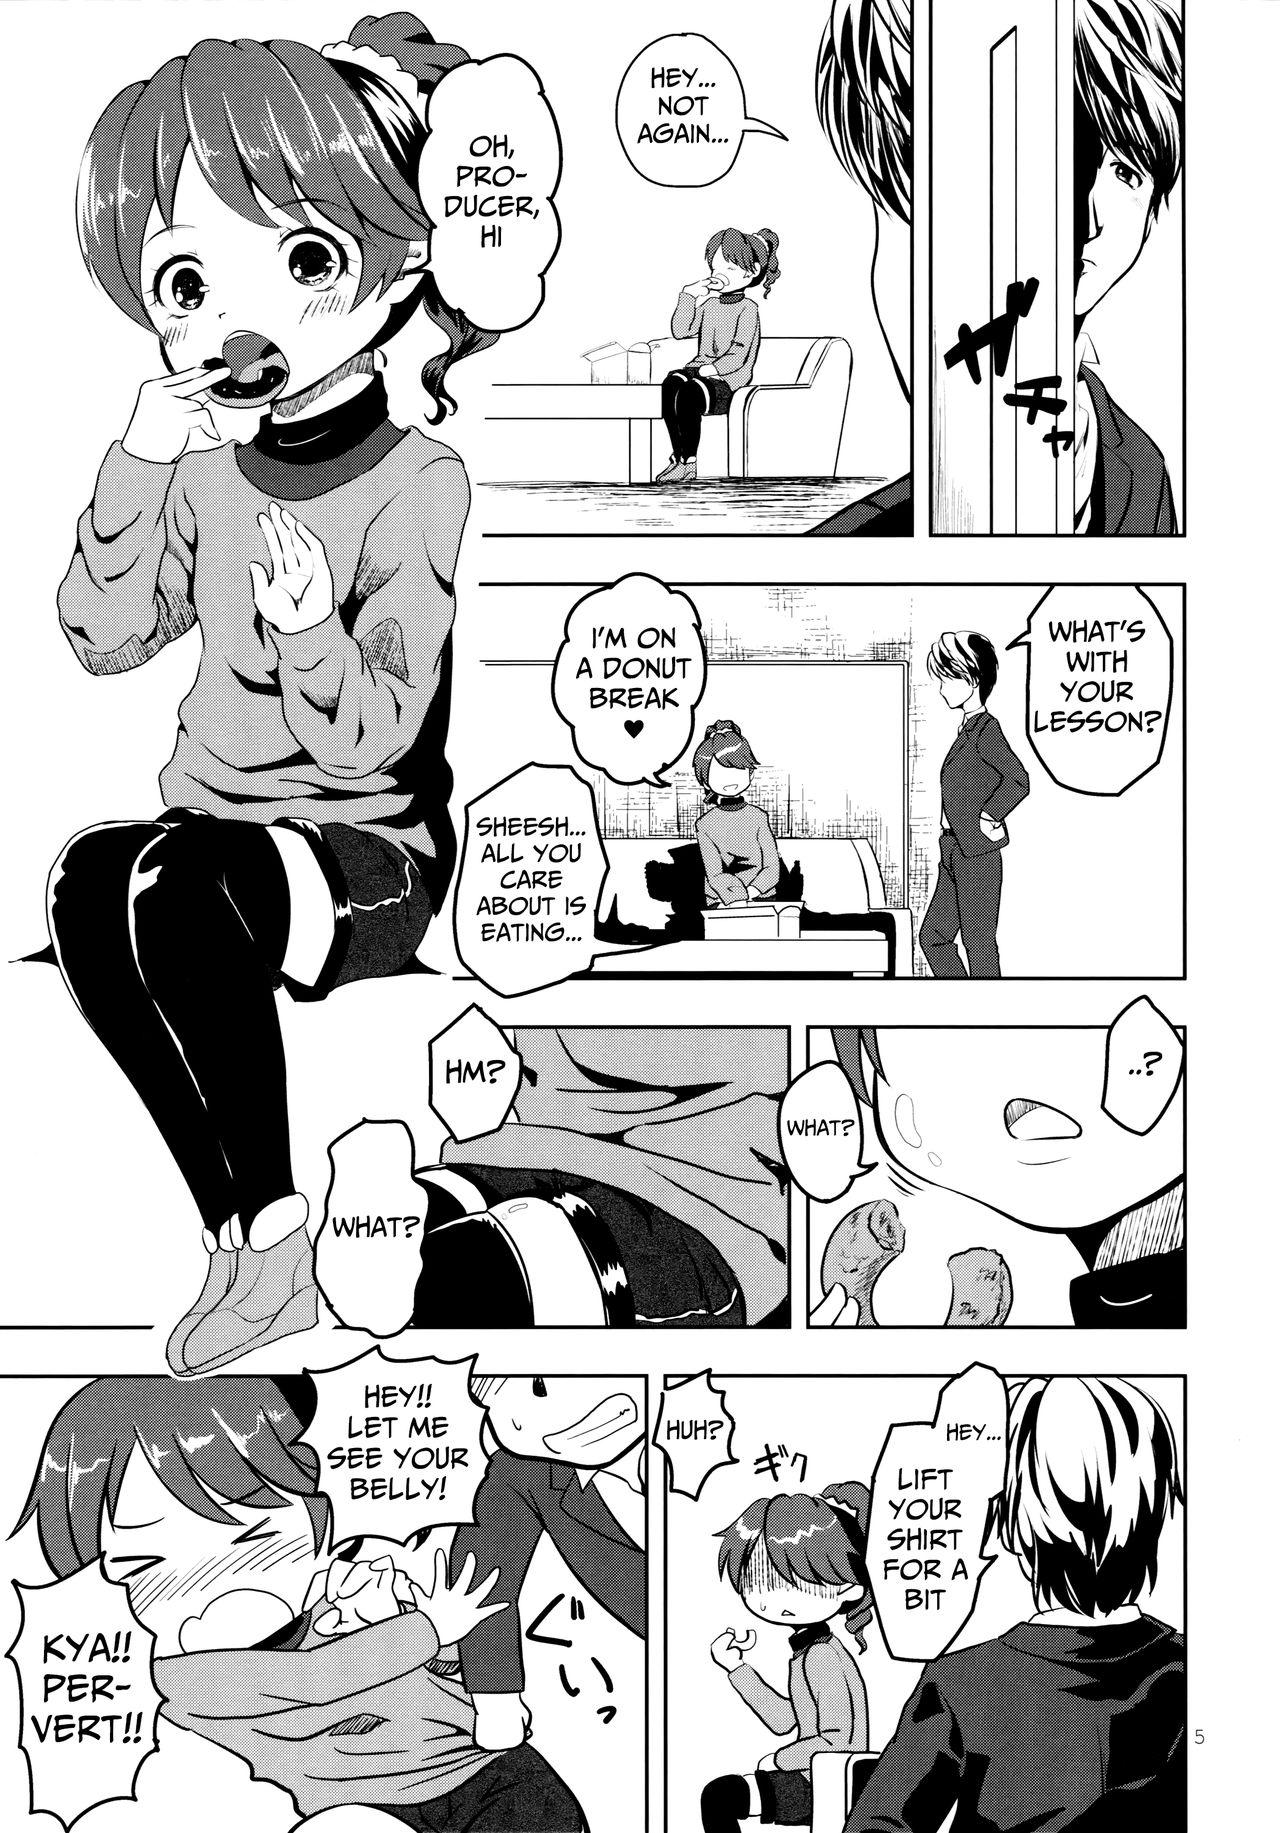 Finger DONUTS LESSON - The idolmaster Brasileiro - Page 4